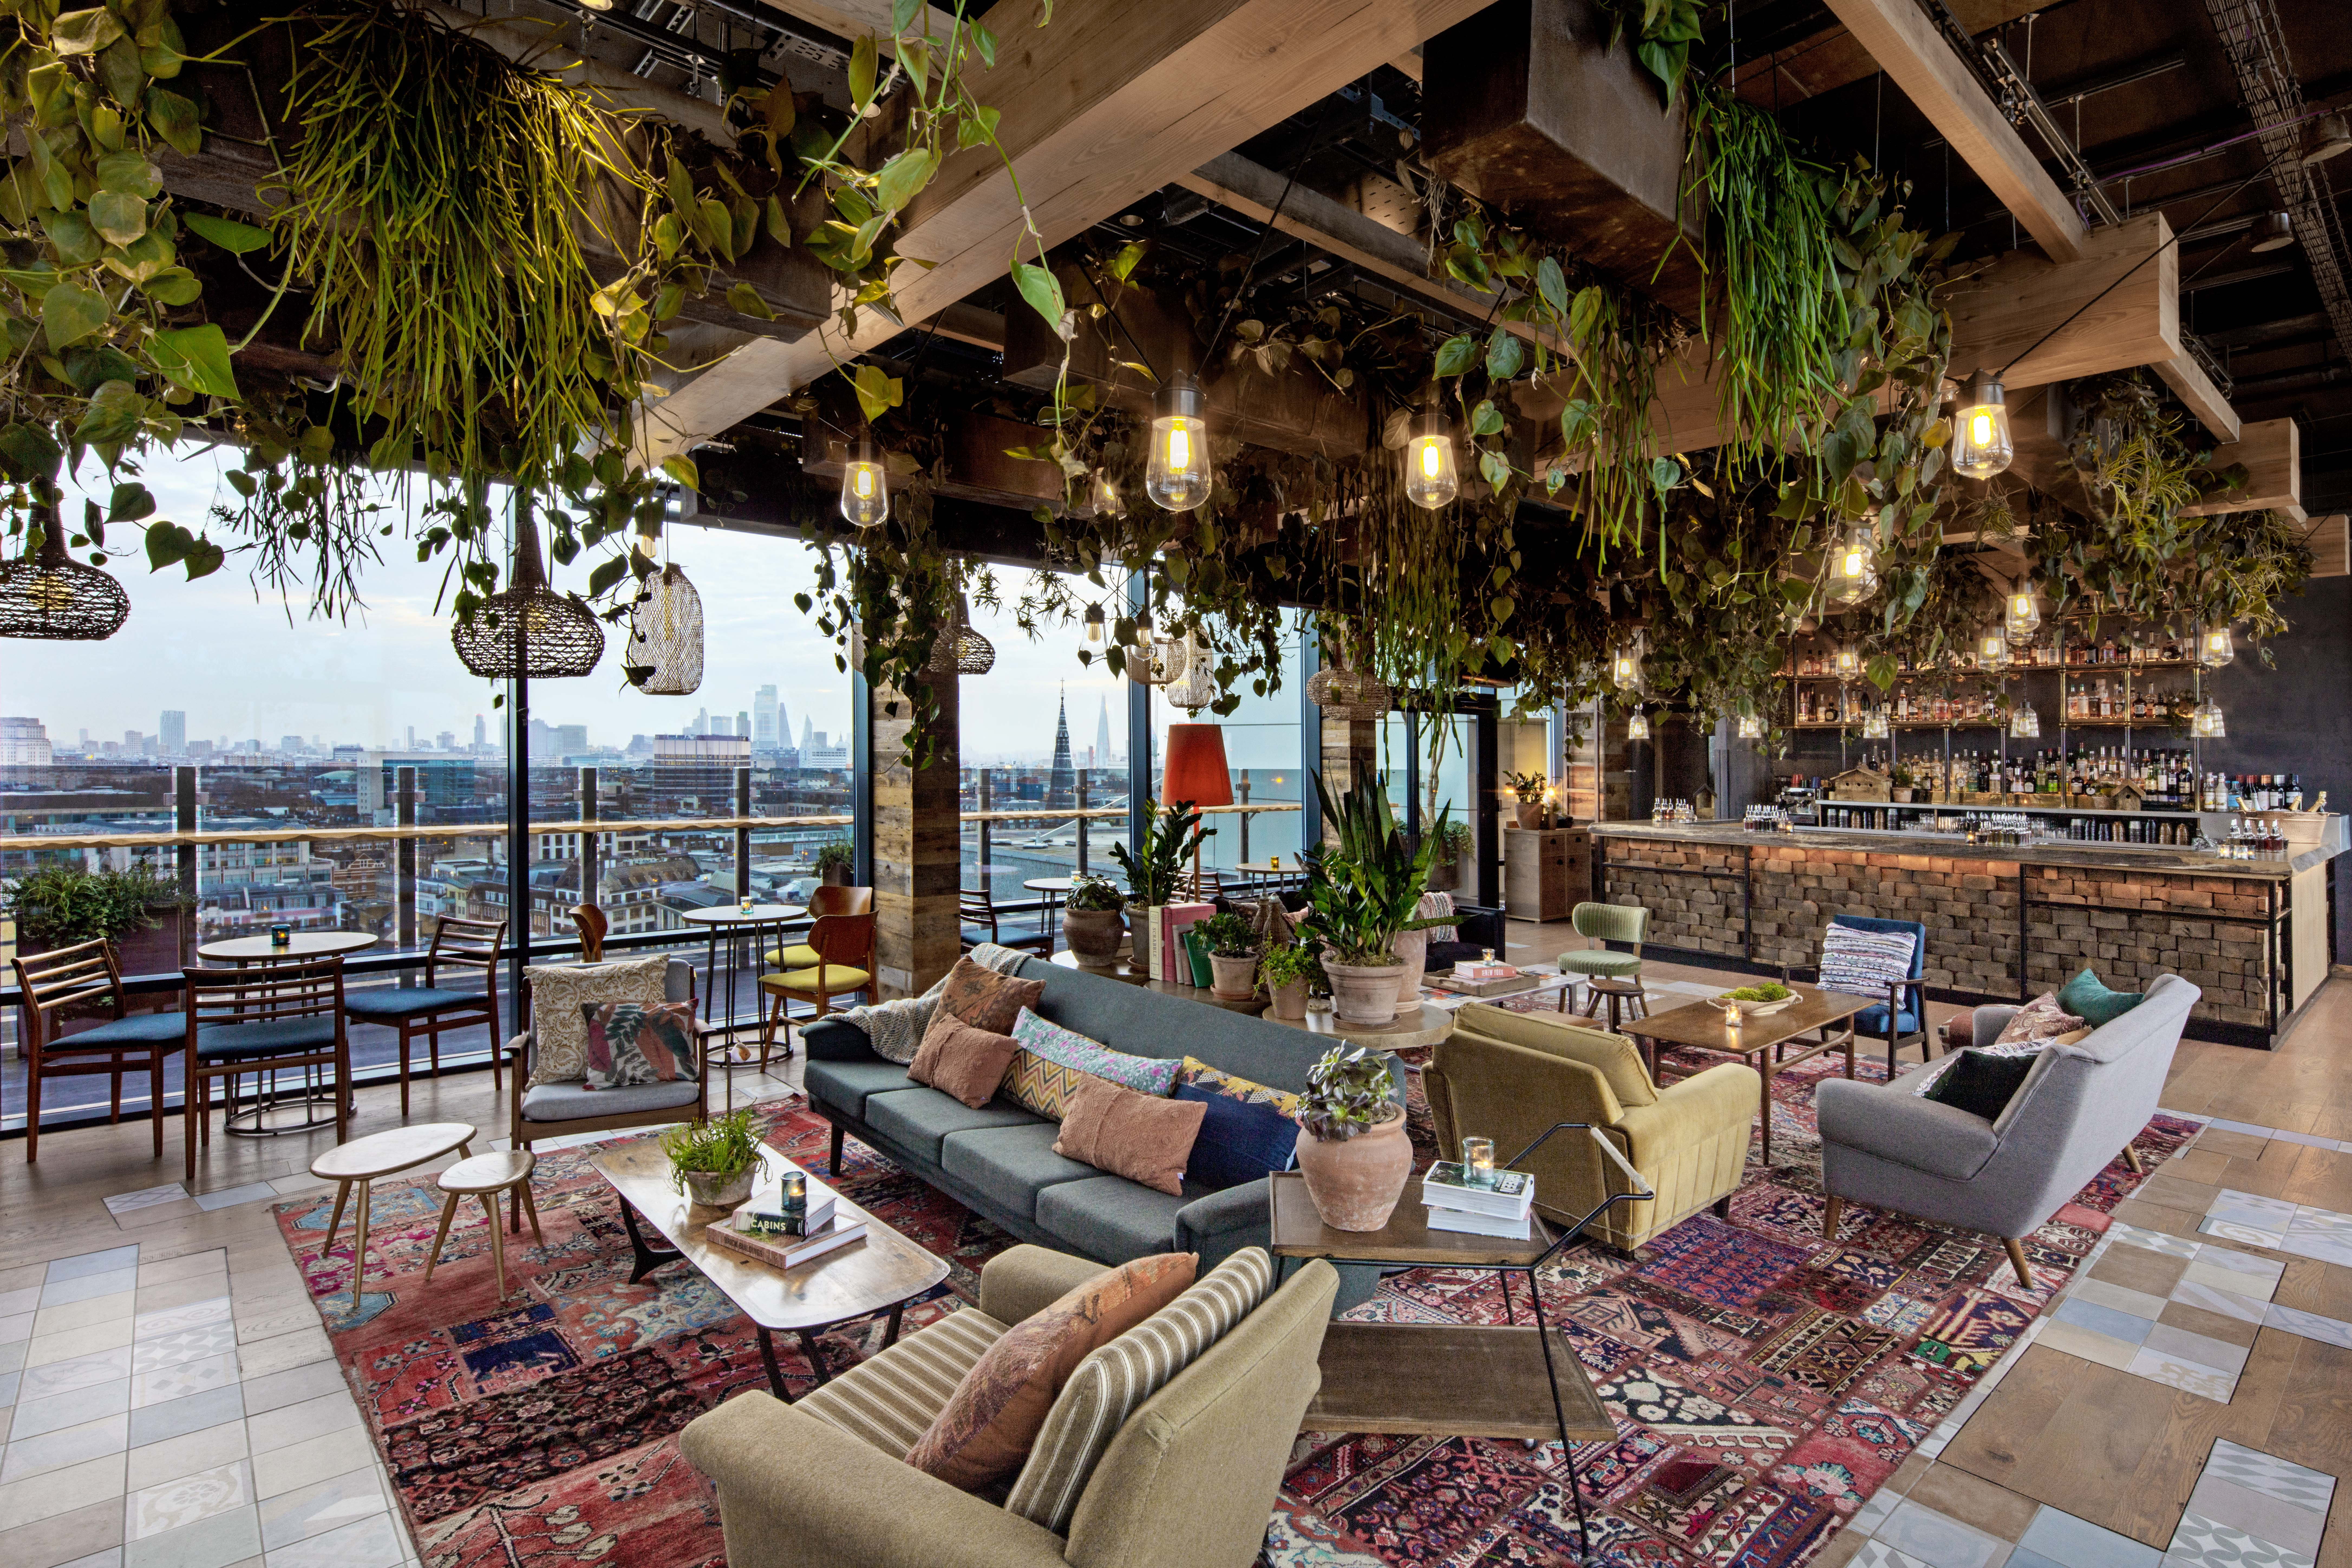 Treehouse Hotel London – Hotels for foodies